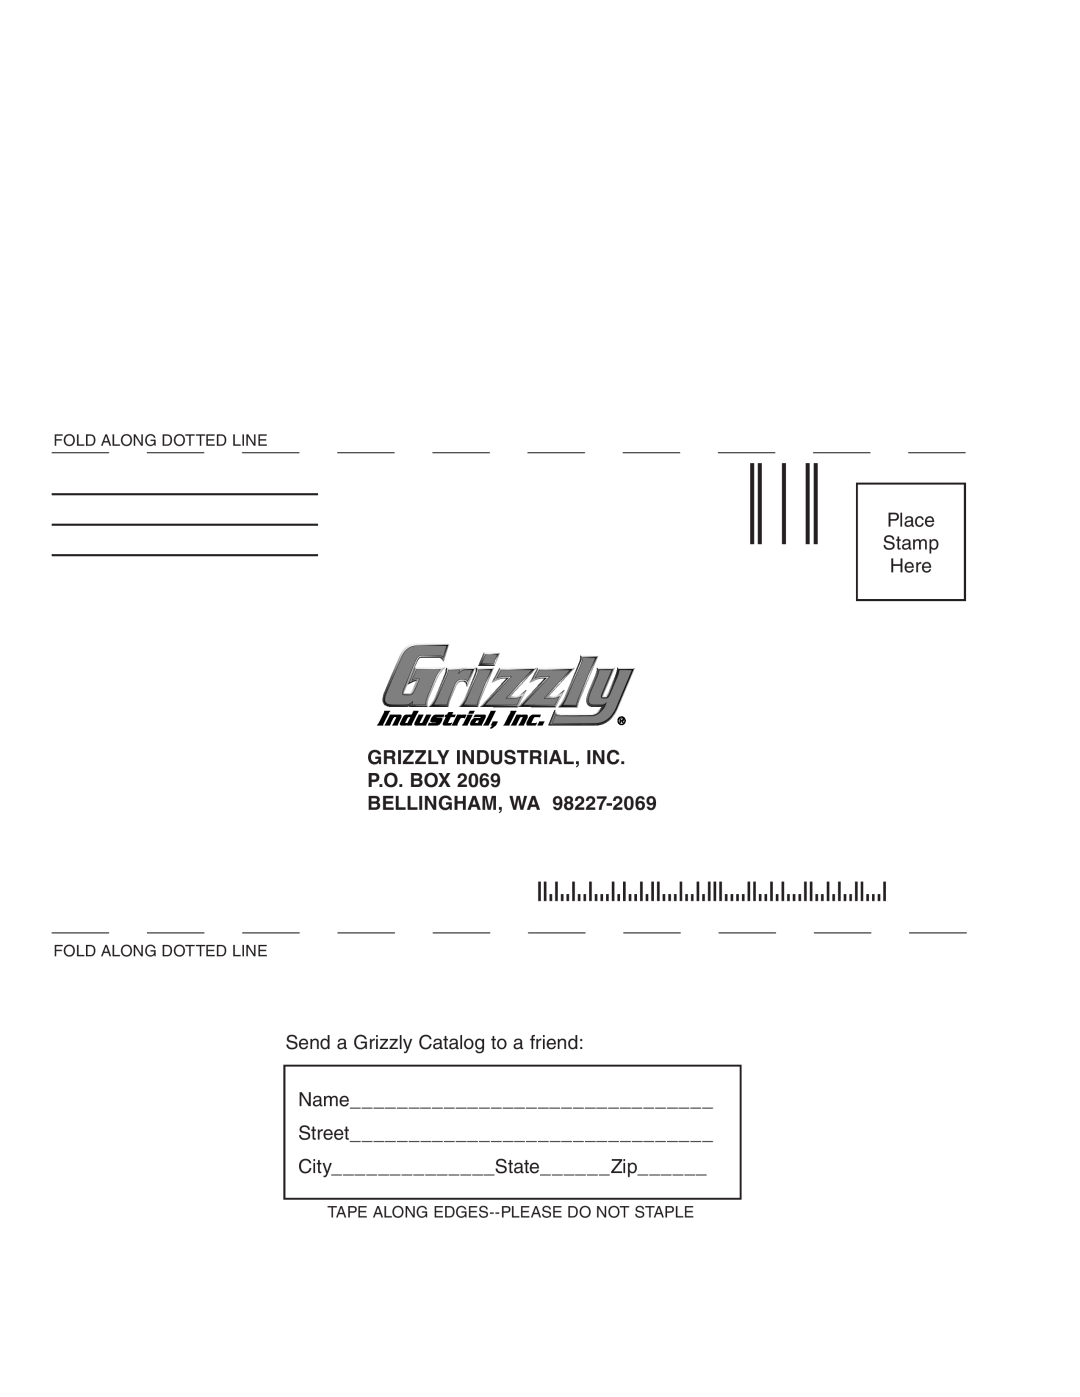 Grizzly G0484 owner manual Place Stamp Here, Grizzly Industrial, Inc P.O. Box Bellingham, Wa 